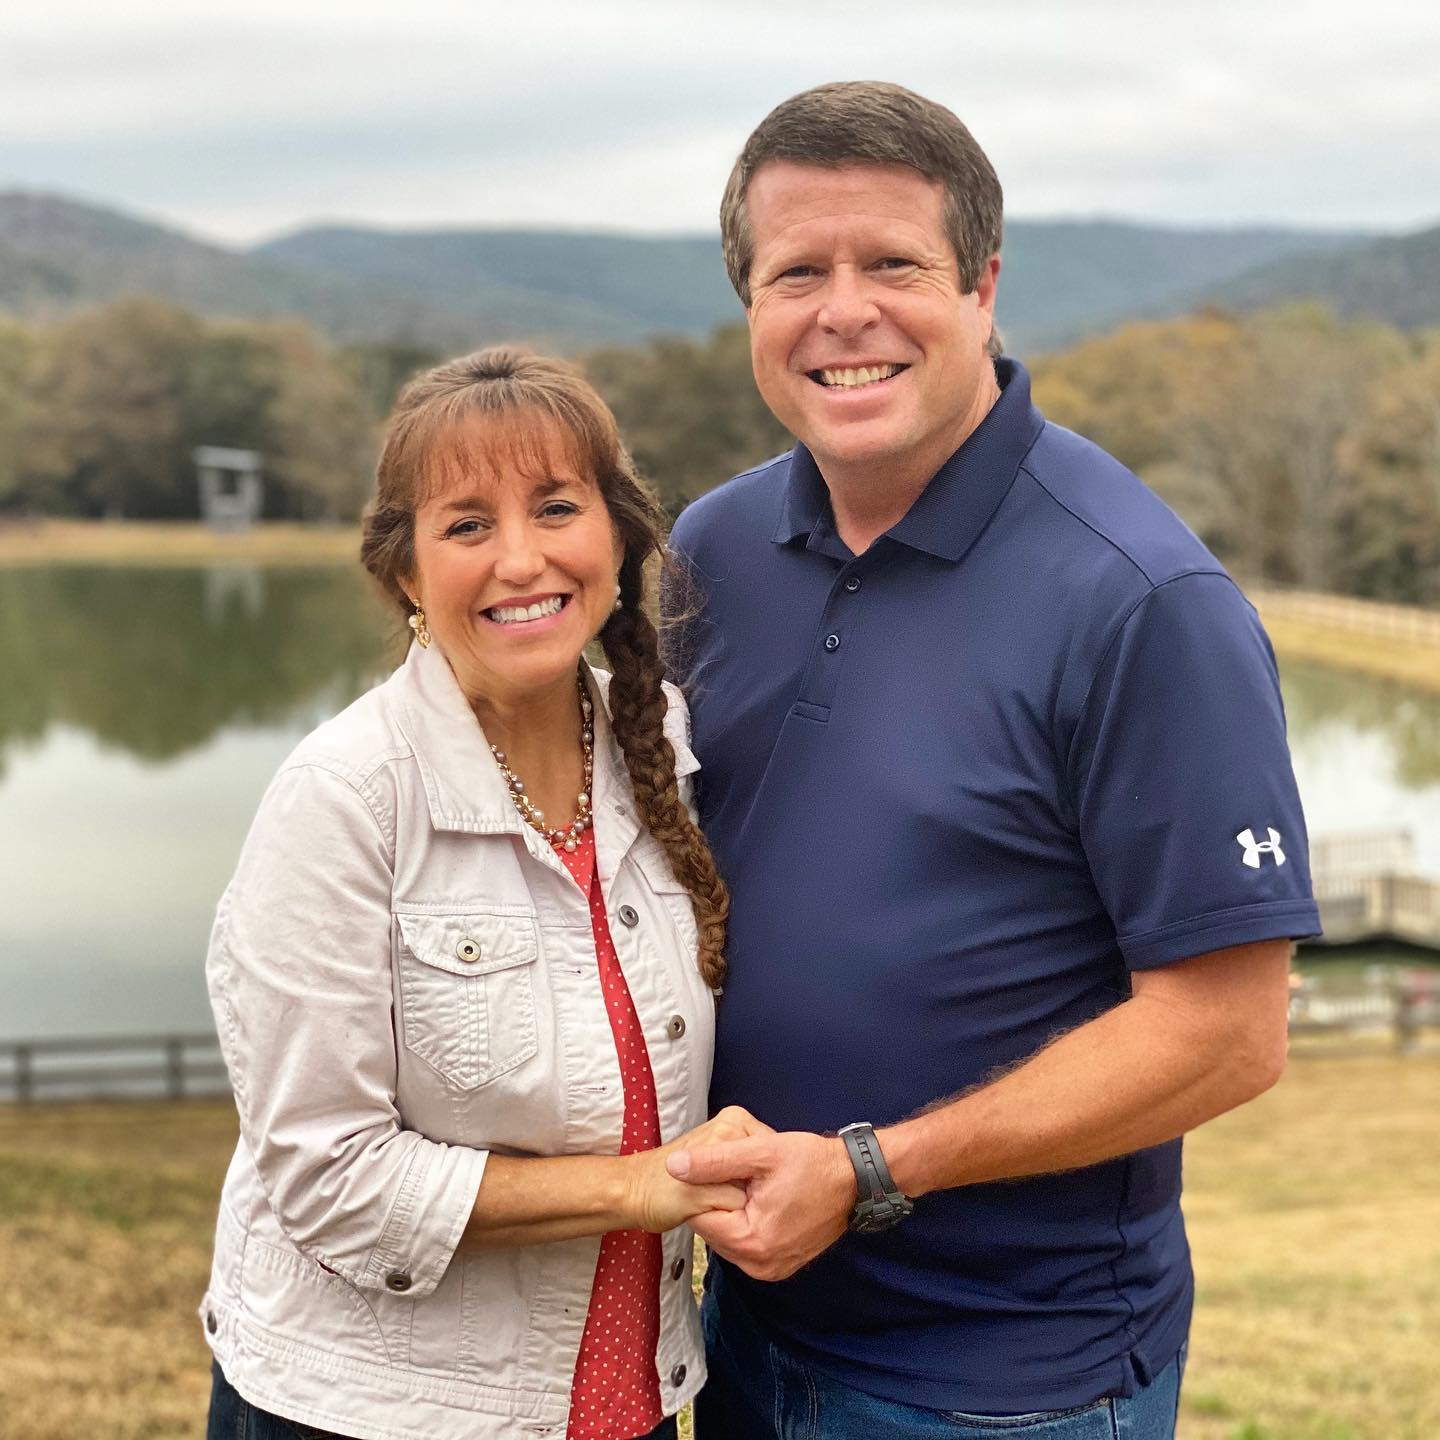 Michelle Duggar pictured with her husband Jim Bob